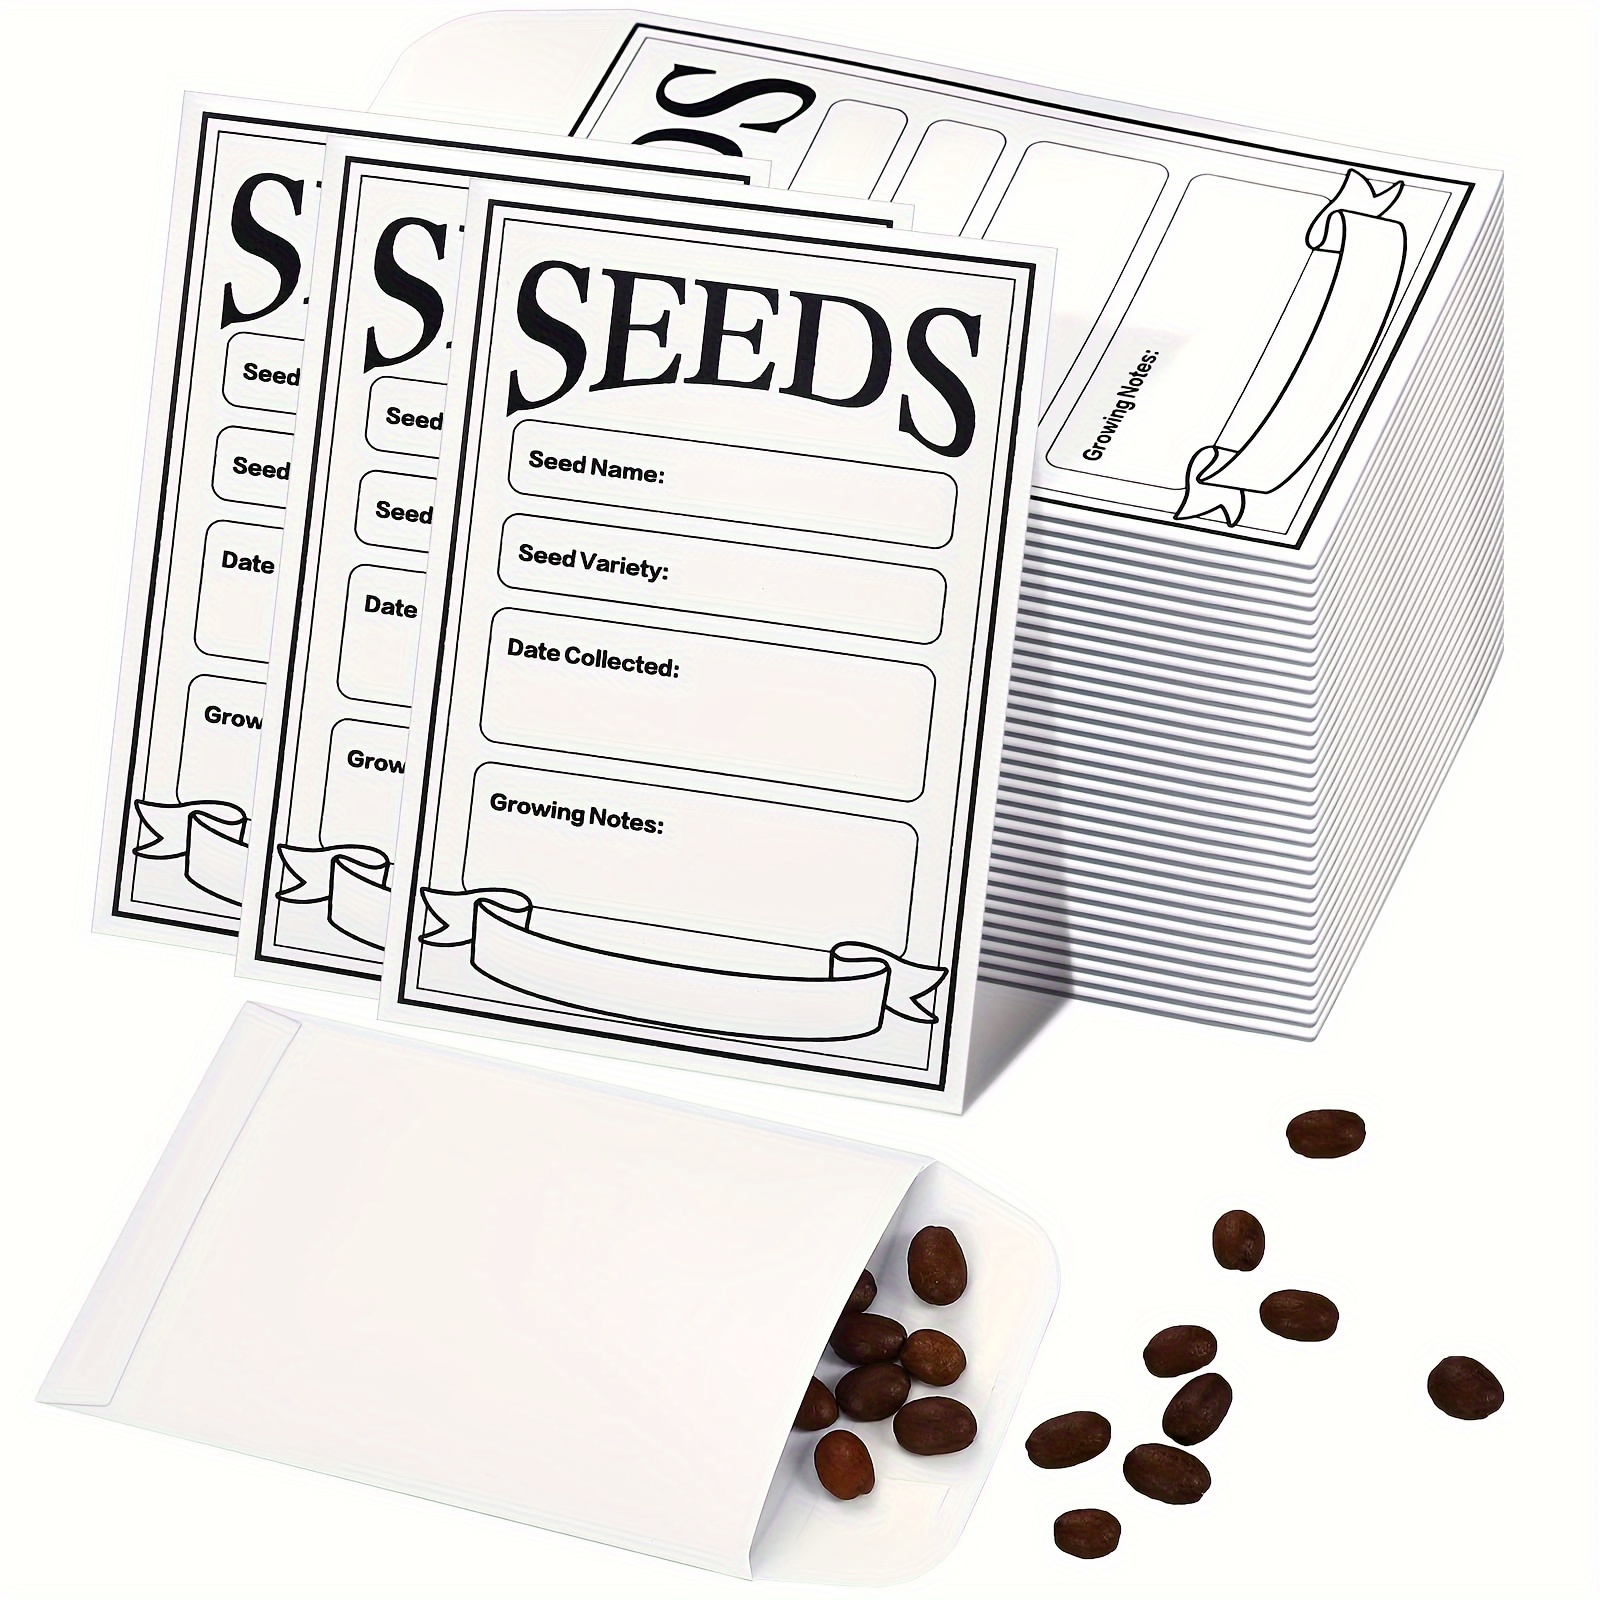 50/100pcs Seed Envelopes, Self Sealing Seed Packets Envelopes, 3.1 X 4.7  Inch Seed Kraft Saving Envelopes, Seed Storage Organizers For Flower  Vegetabl